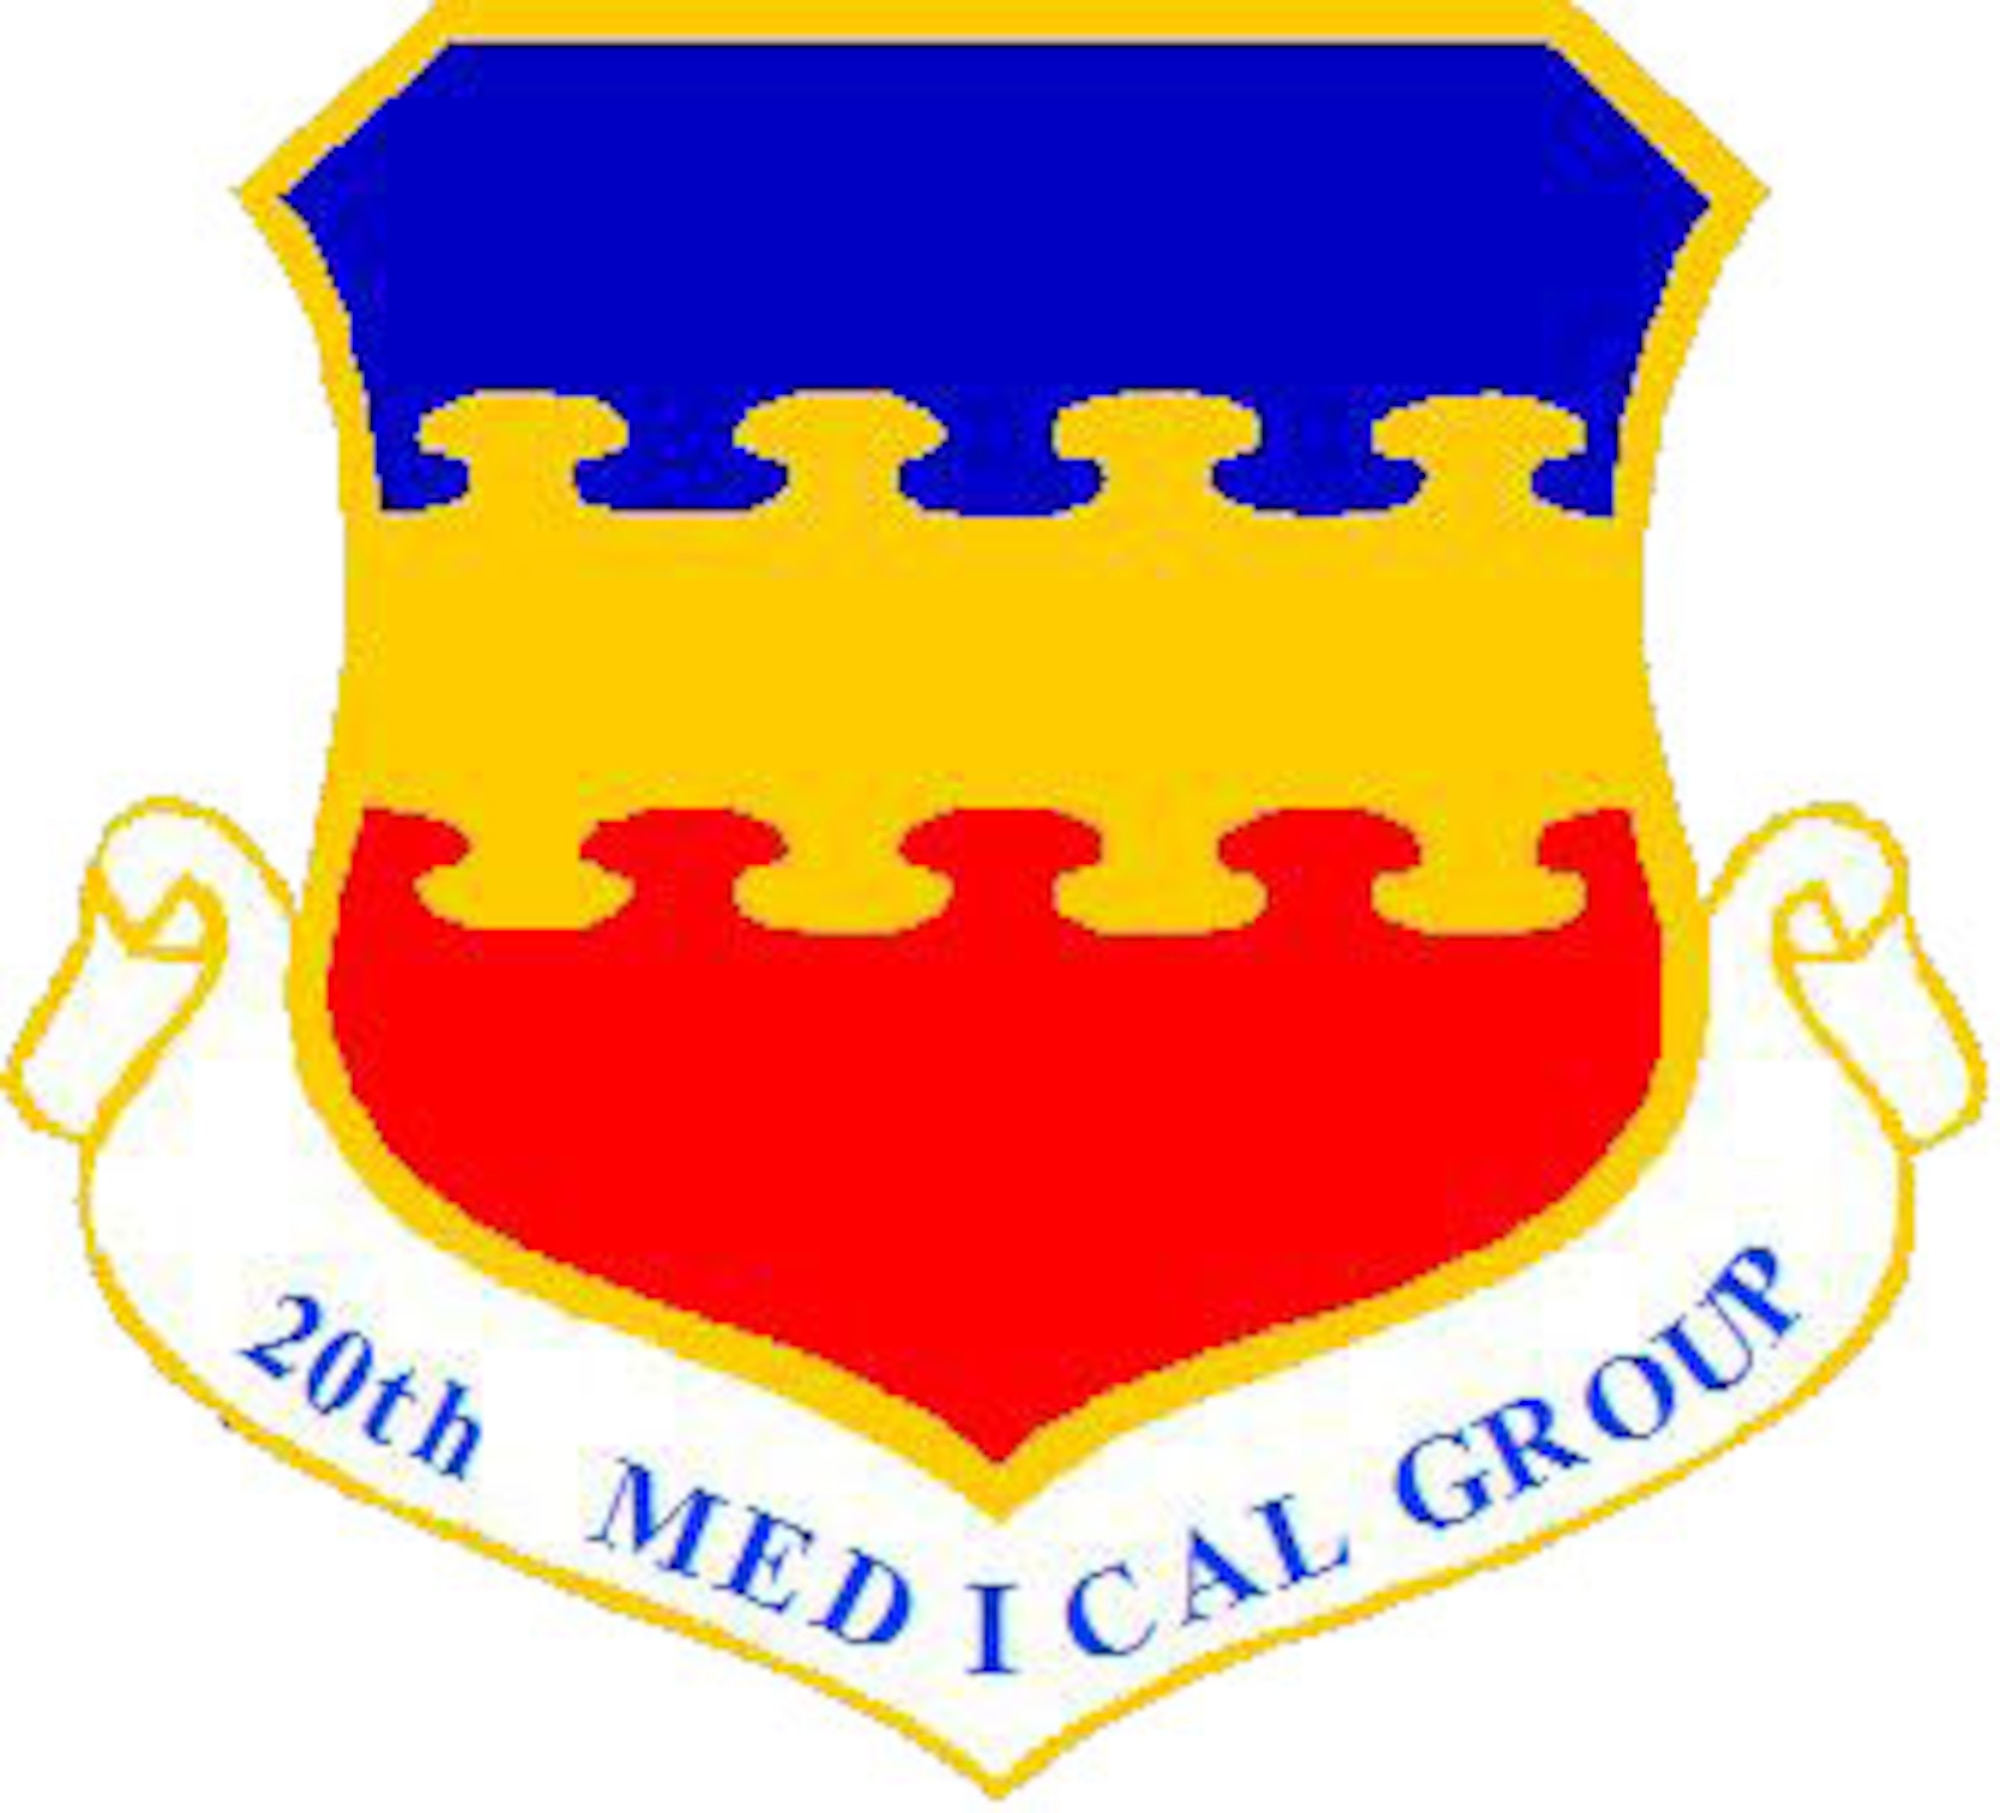 The 20th Medical Group has earned The Joint Commission’s Gold Seal of Approval for Ambulatory Health Care Accreditation by demonstrating continuous compliance with its nationally-recognized standards, as well as Primary Care Medical Home Certification. The 20th MDG underwent an on-site survey conducted by the joint commission surveyors. (Courtesy Graphic) 